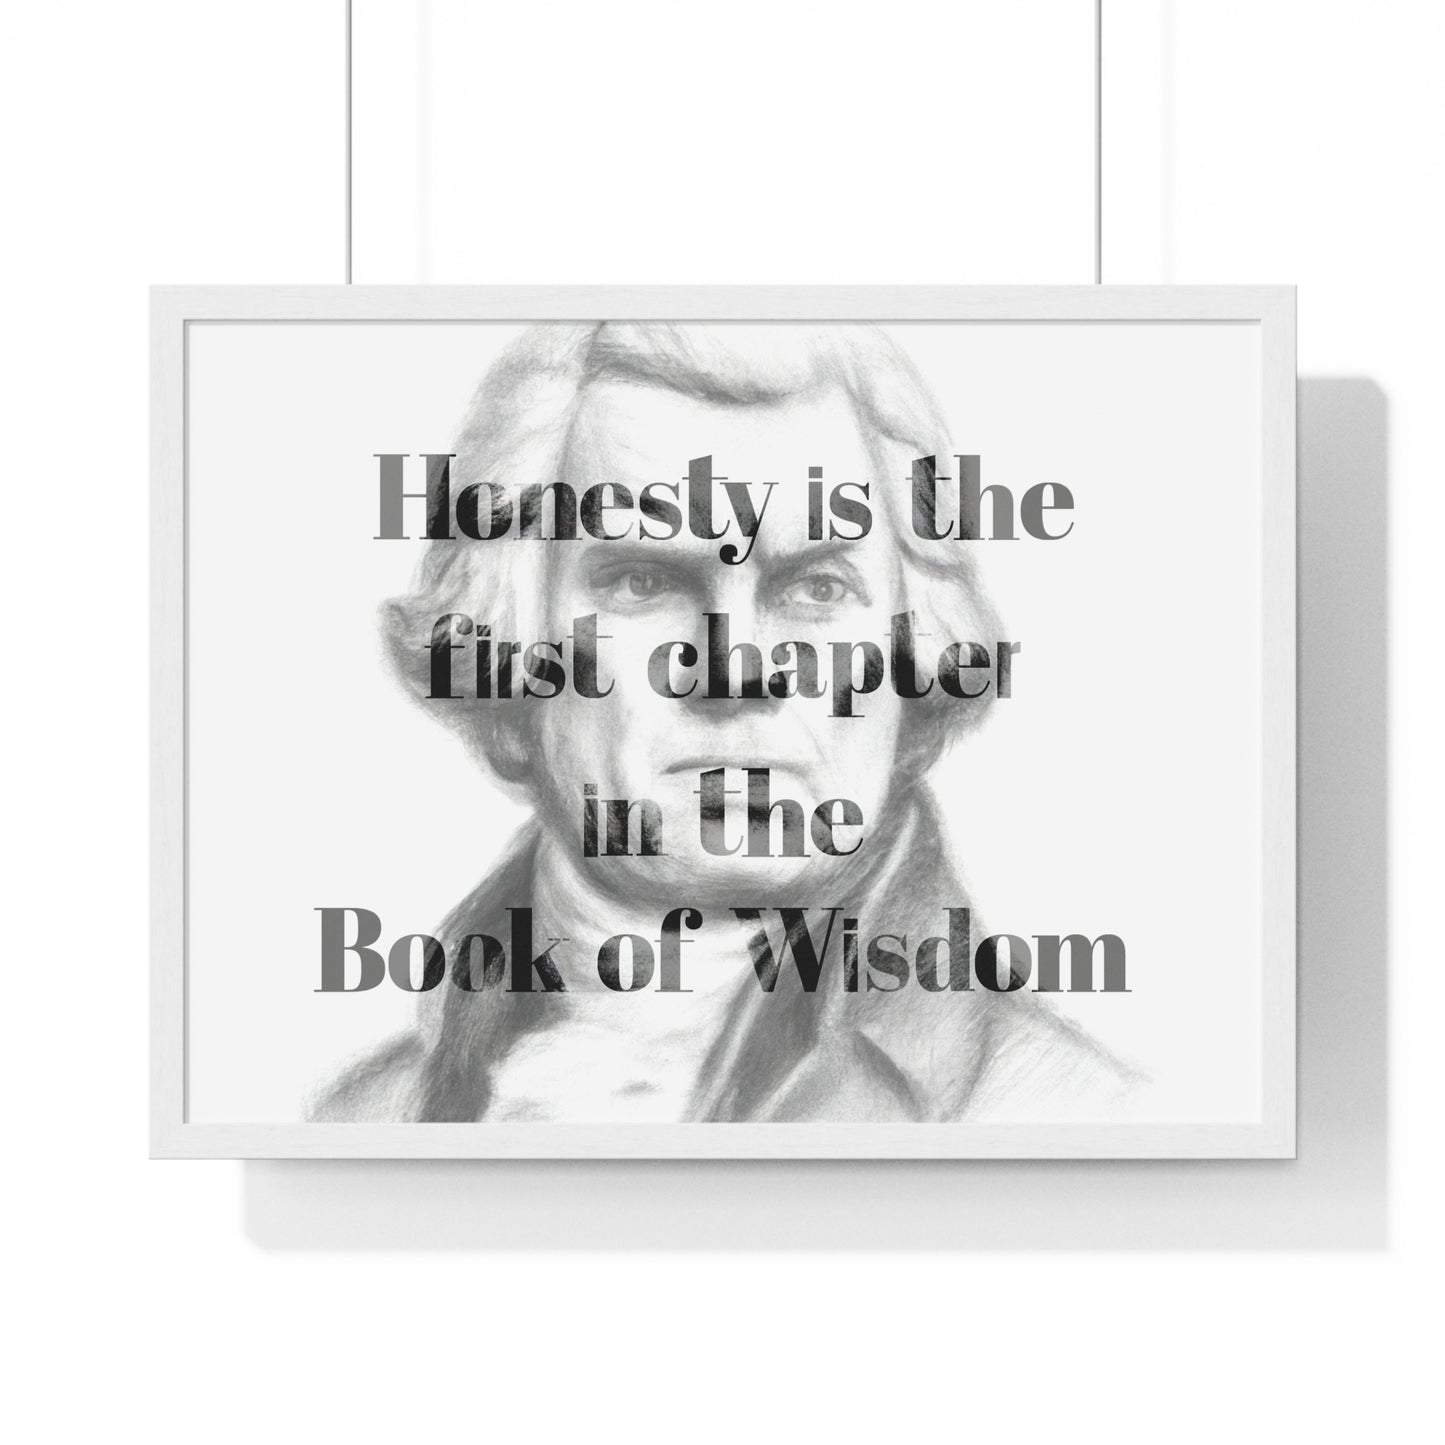 Thomas Jefferson Quote 1, Poster Art, Horizontal Light Print, 3rd President of the United States, American Patriots, AI Art, Political Art, Poster Prints, Presidential Portraits, Presidential Quotes, Inspirational Quotes